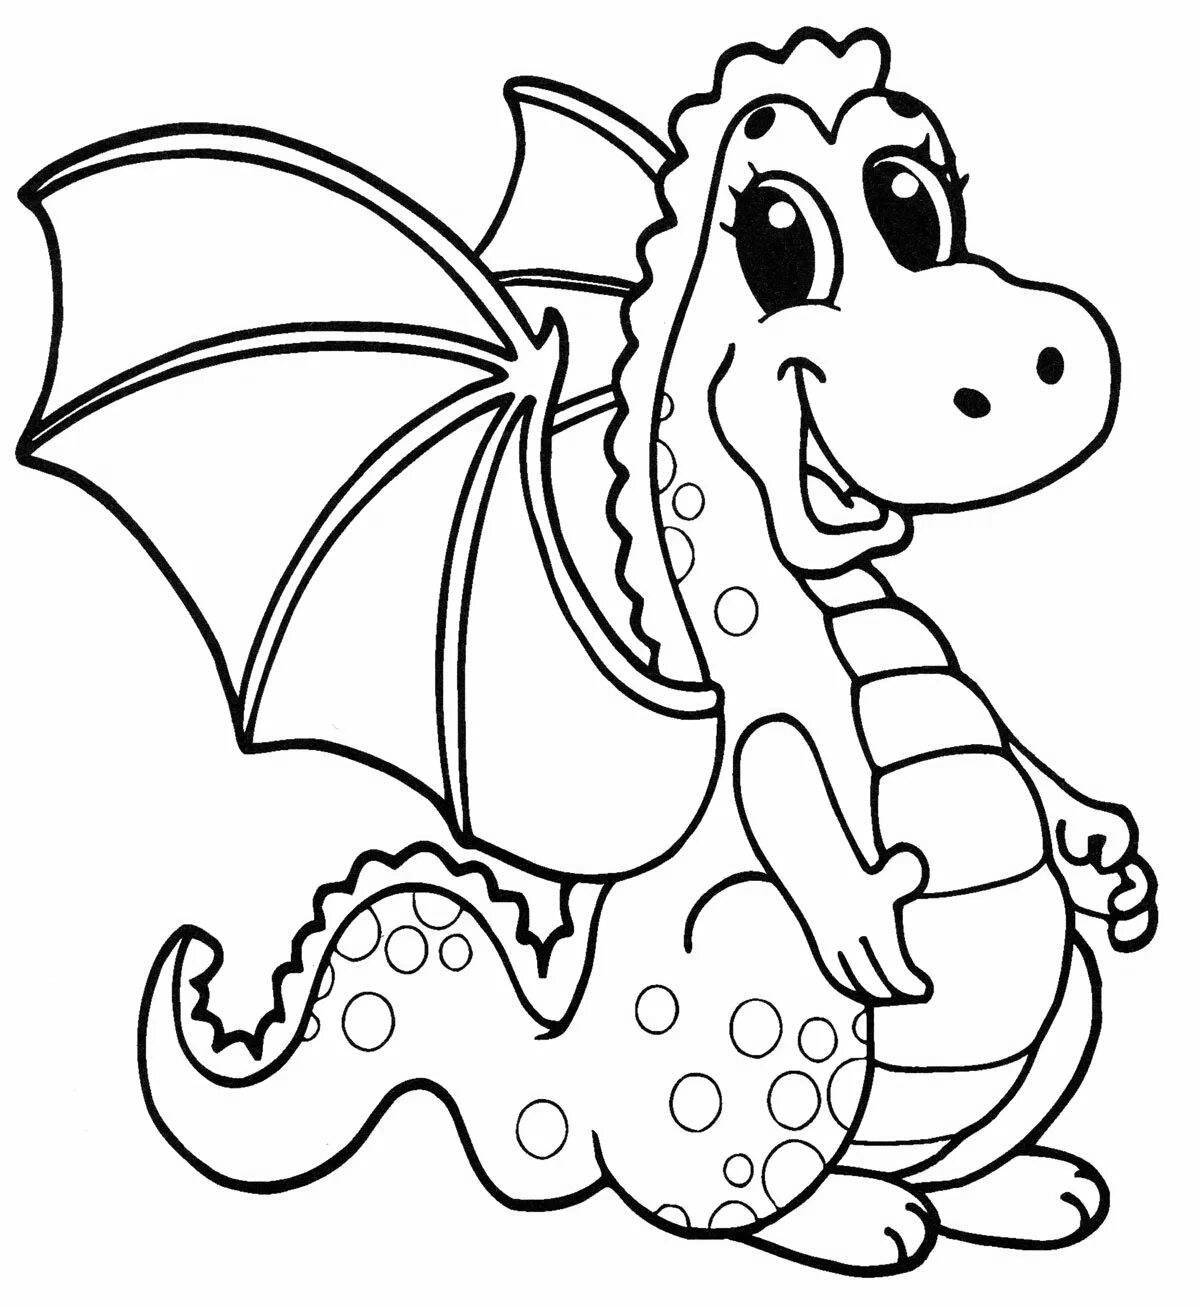 Great dragon coloring book for kids 4-5 years old